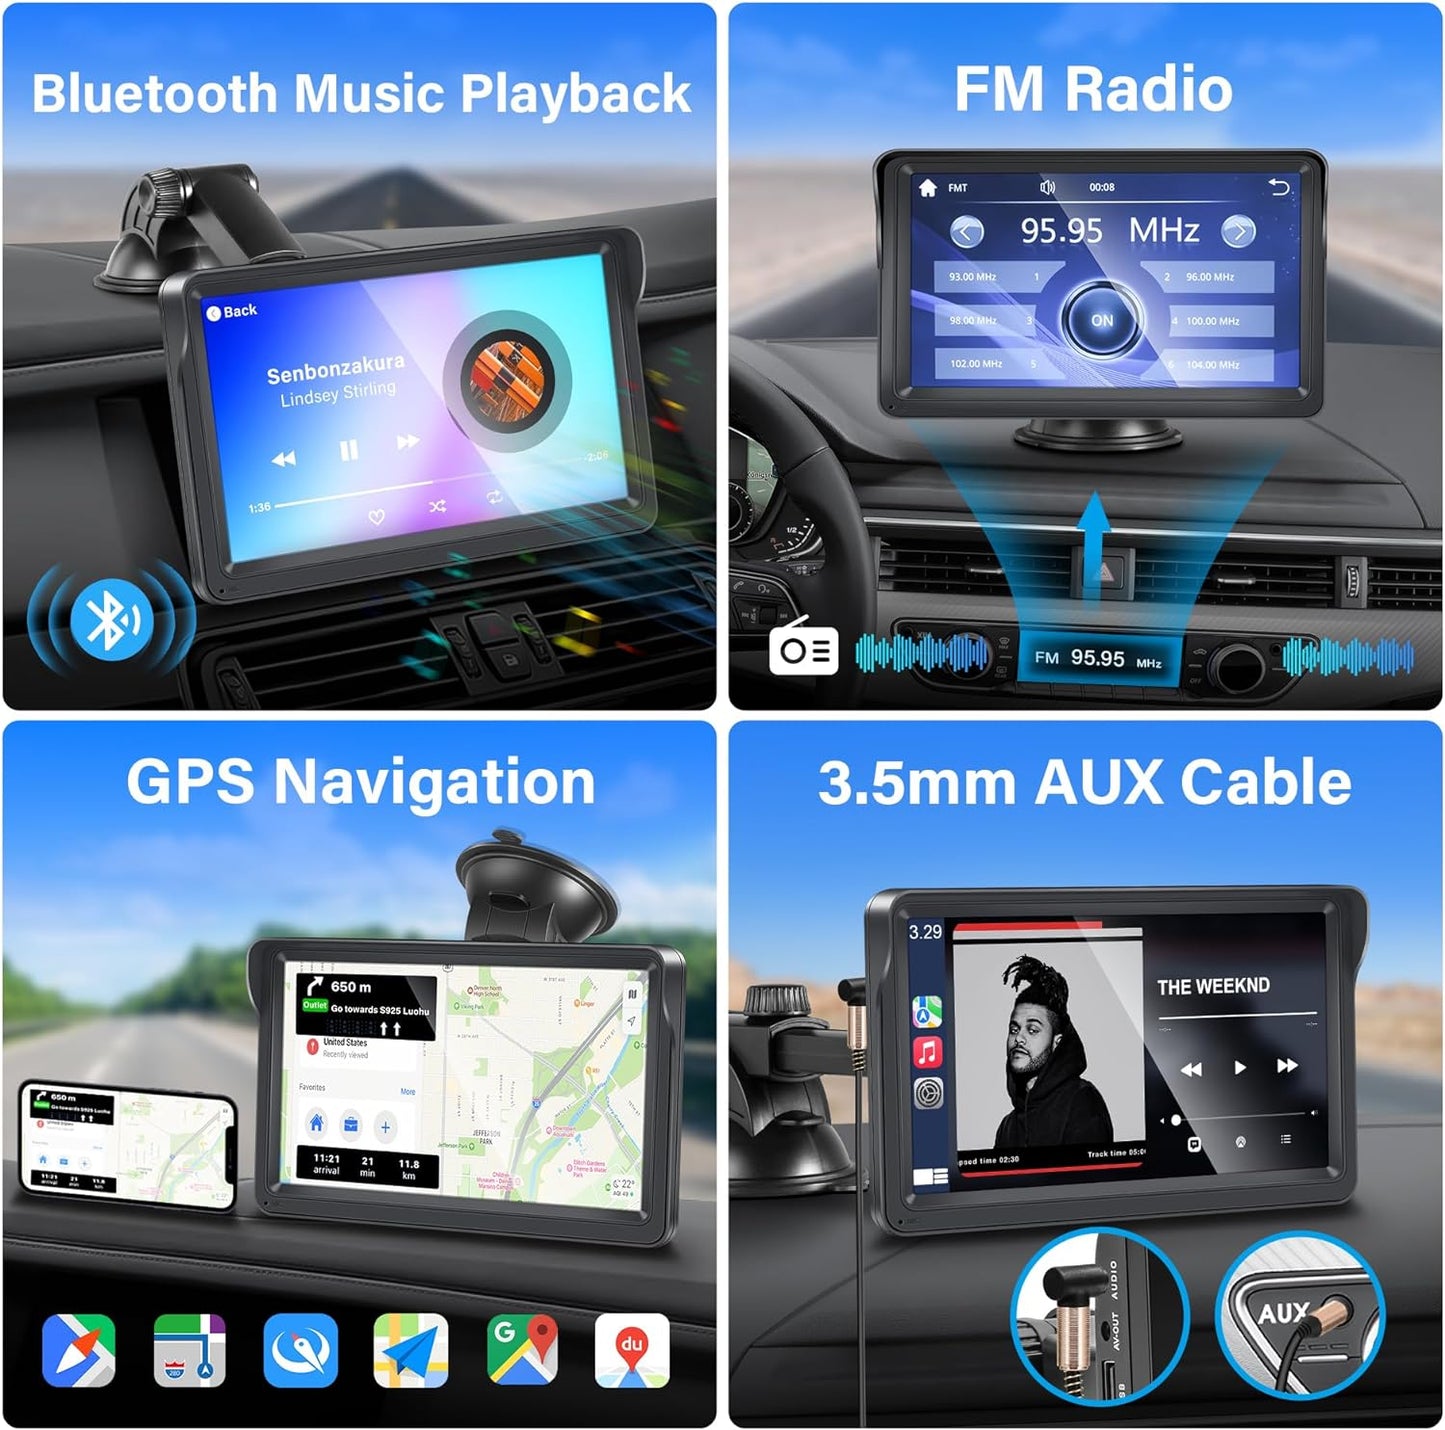 Apple & Android CarPlay Screen - Cheap & easy CarPlay in your old car